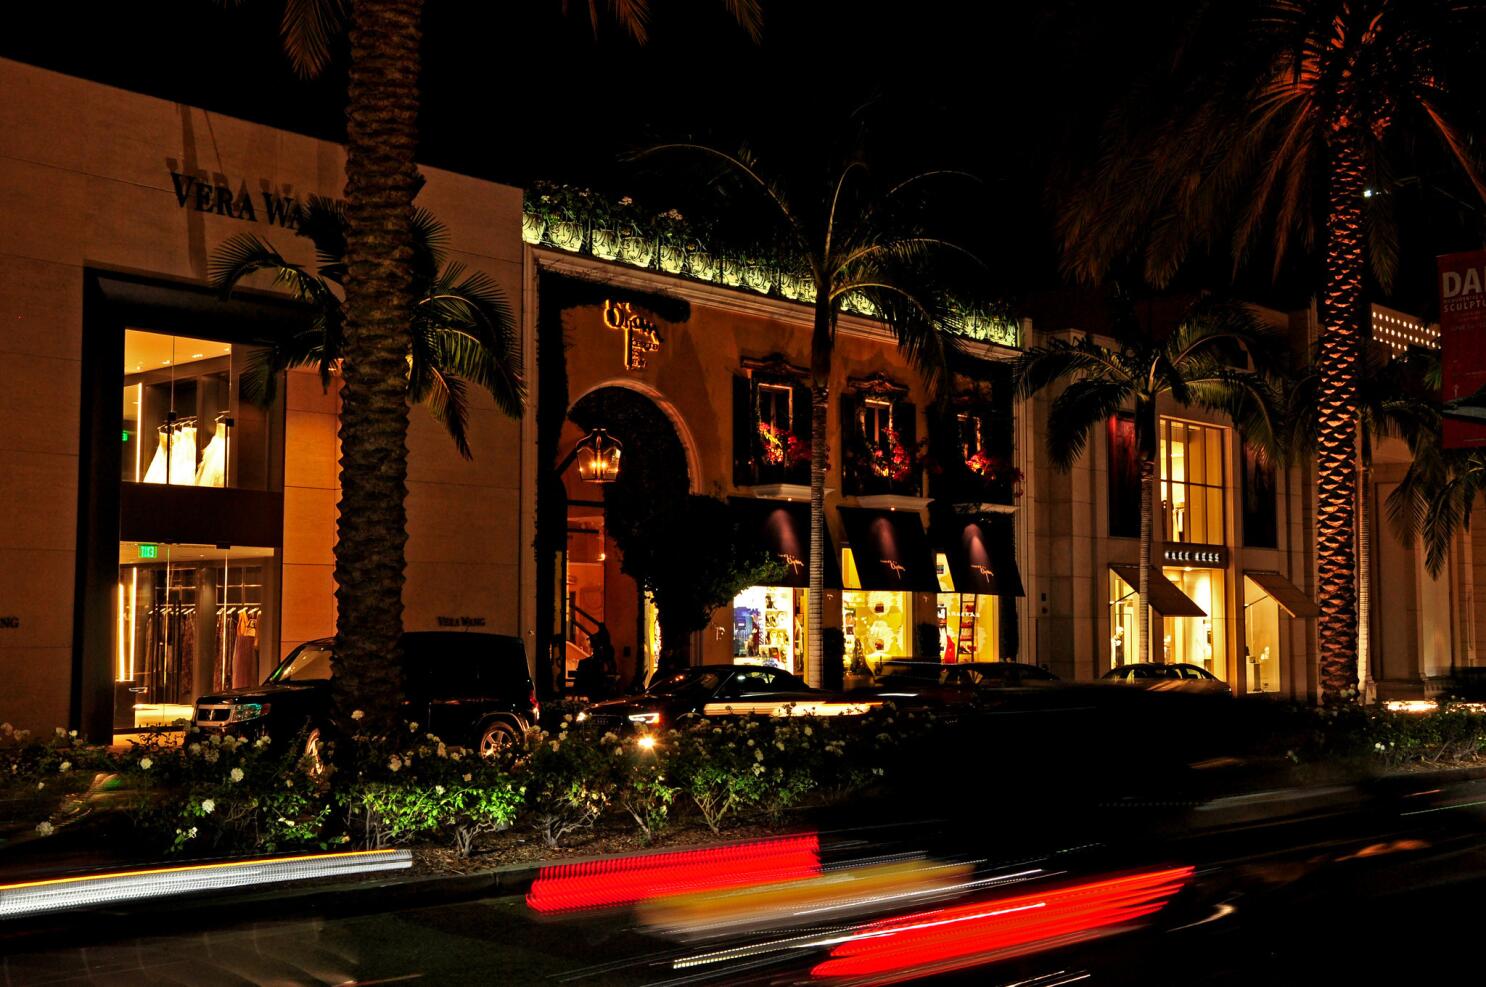 Rodeo drive by night stock image. Image of luxury, lifestyle